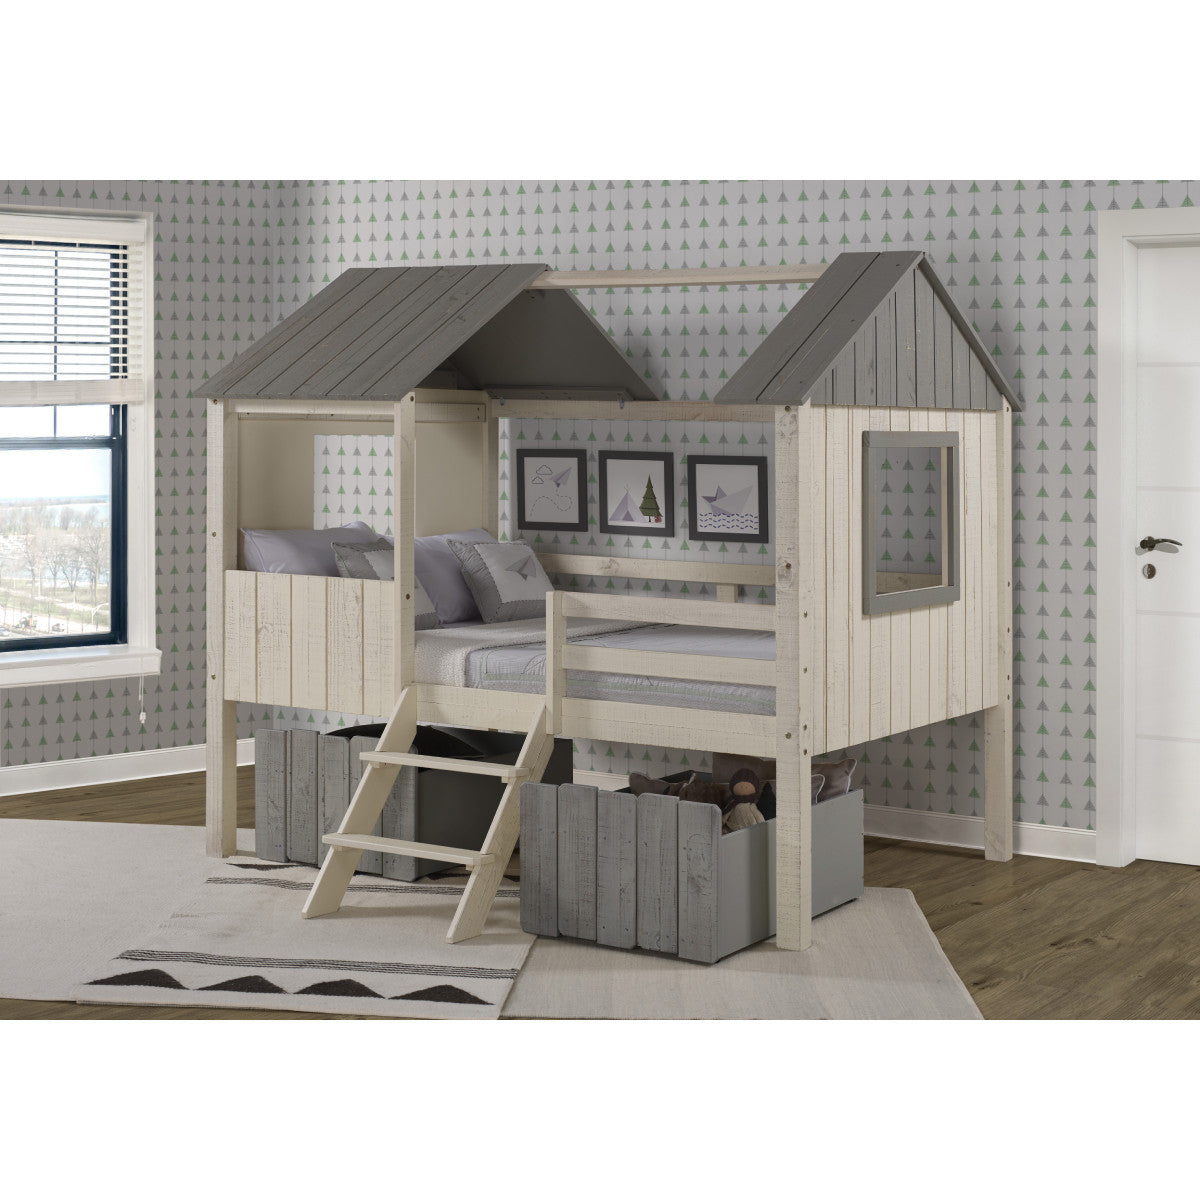 FULL HOUSE LOW LOFT RUSTIC SAND/RUSTIC GREY WITH DUAL LOFT DRAWERS